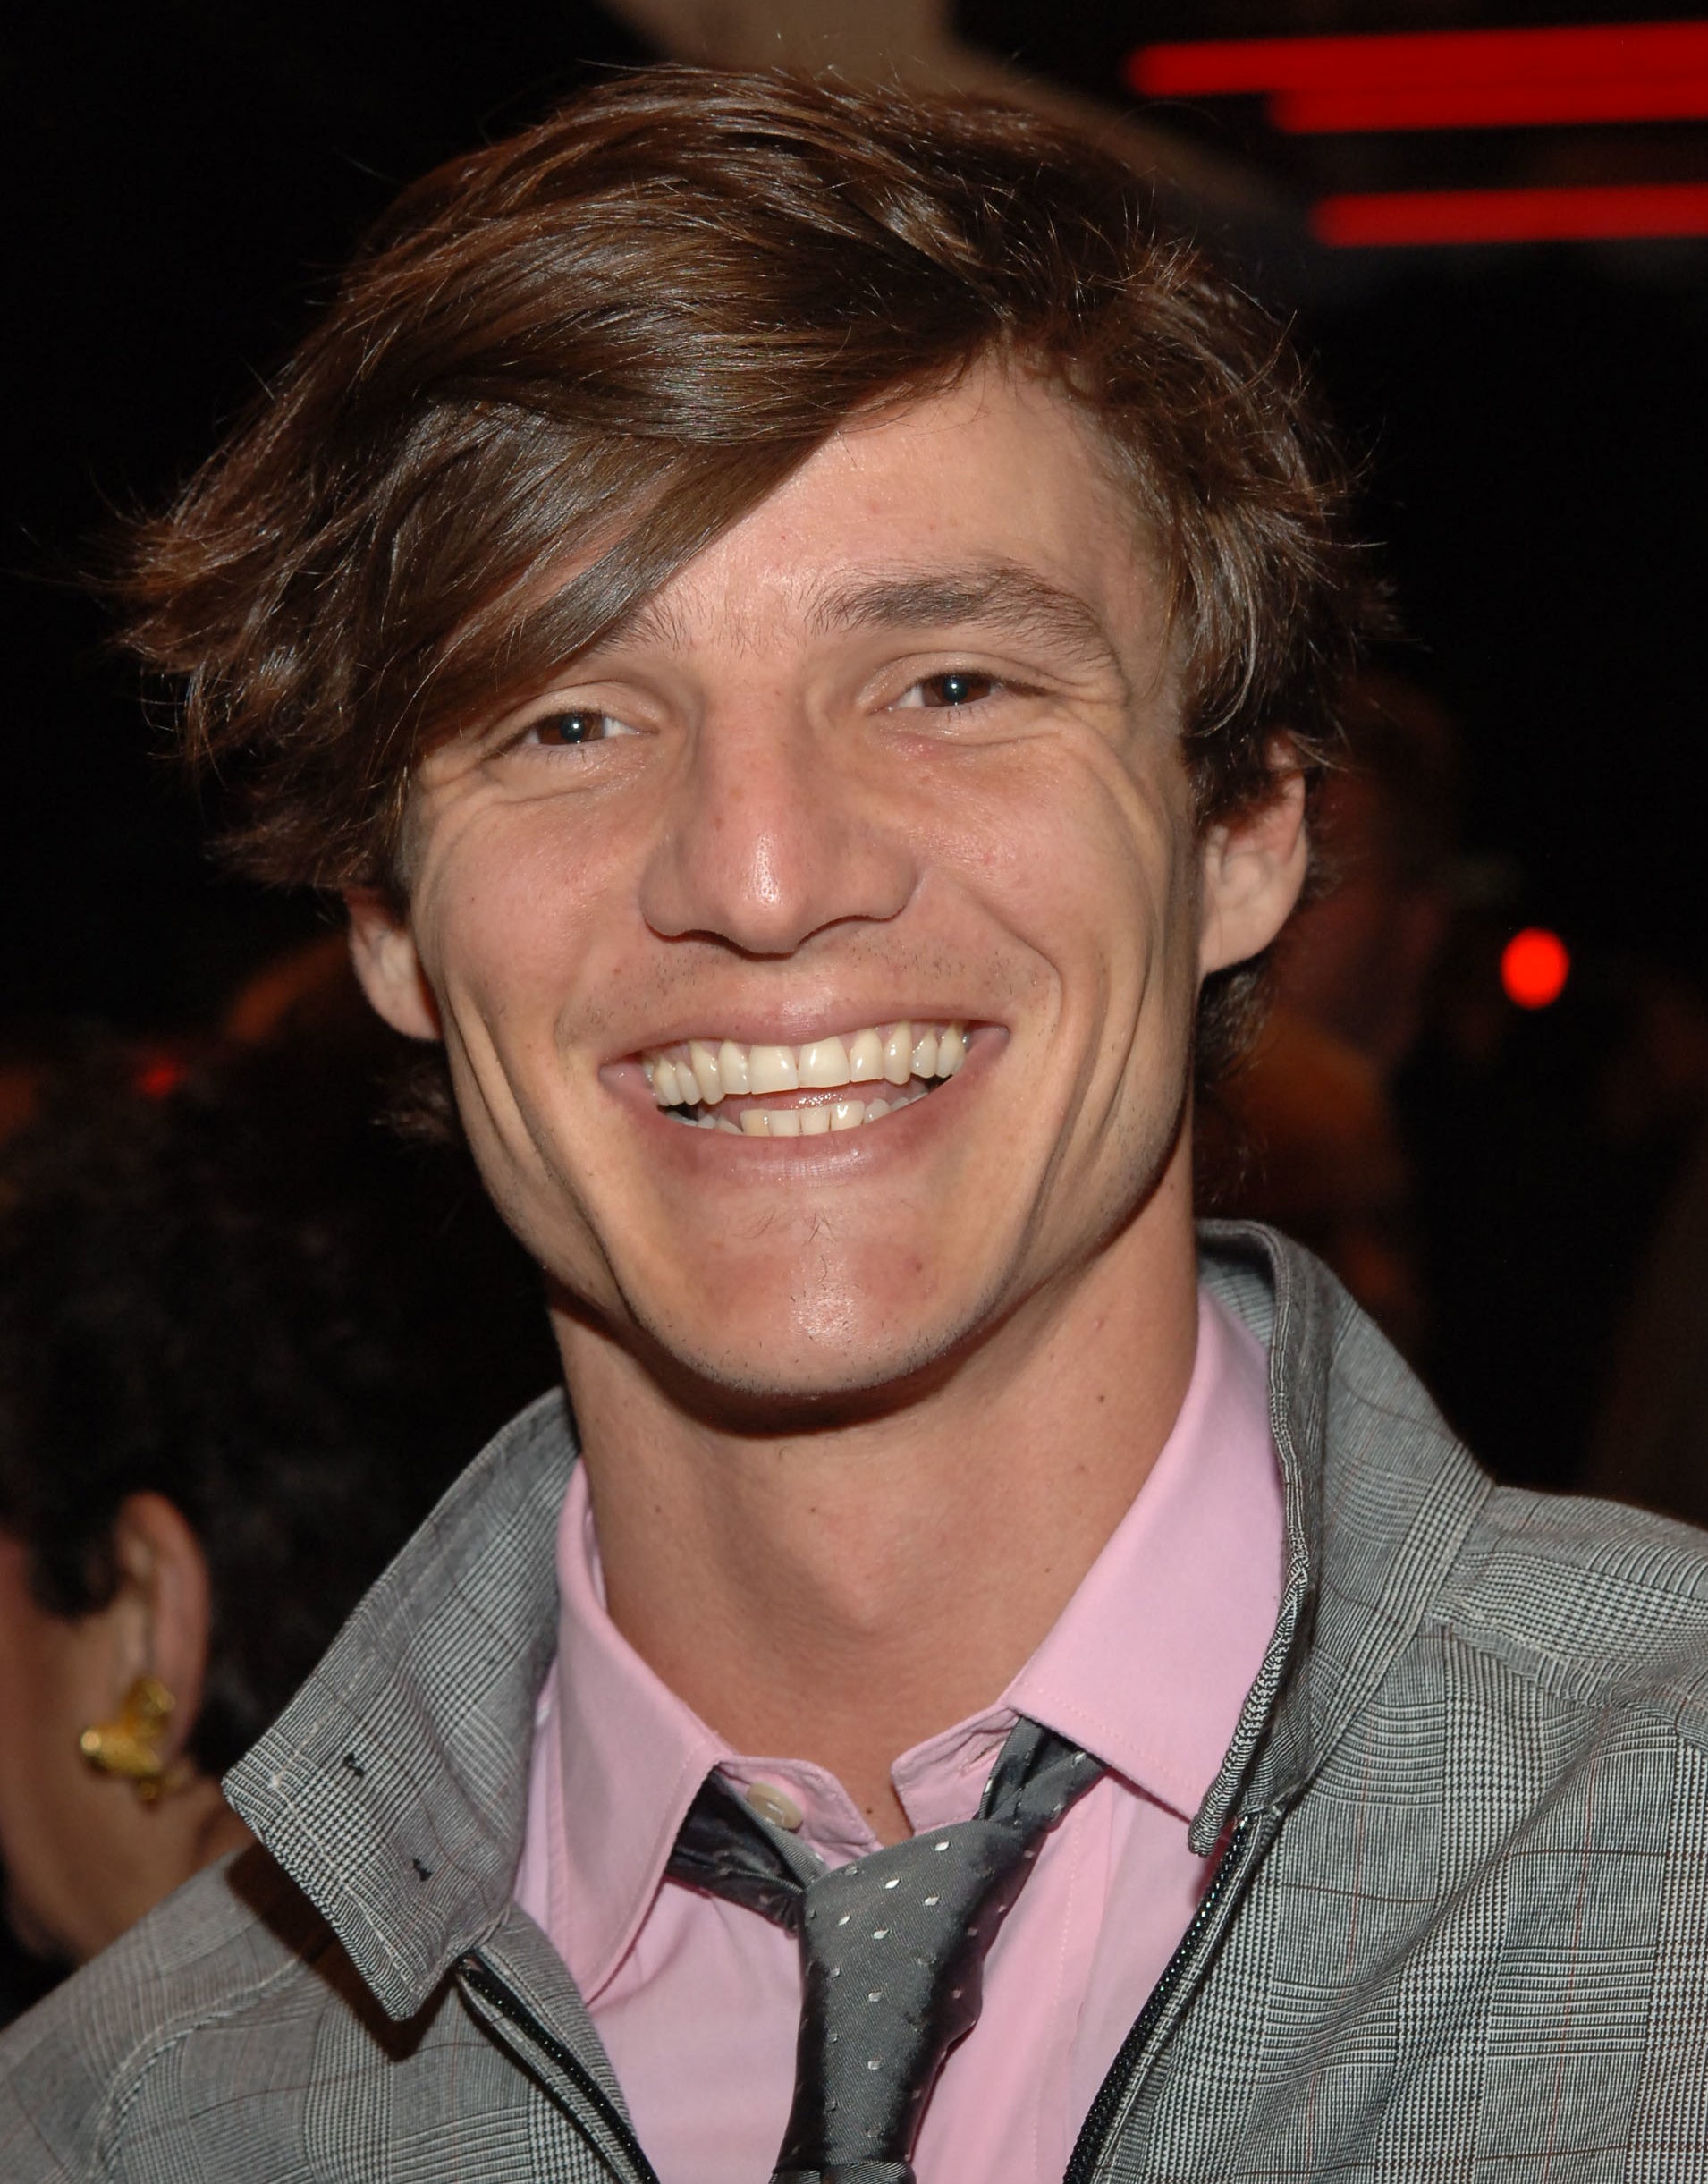 Pedro Pascal in 2005